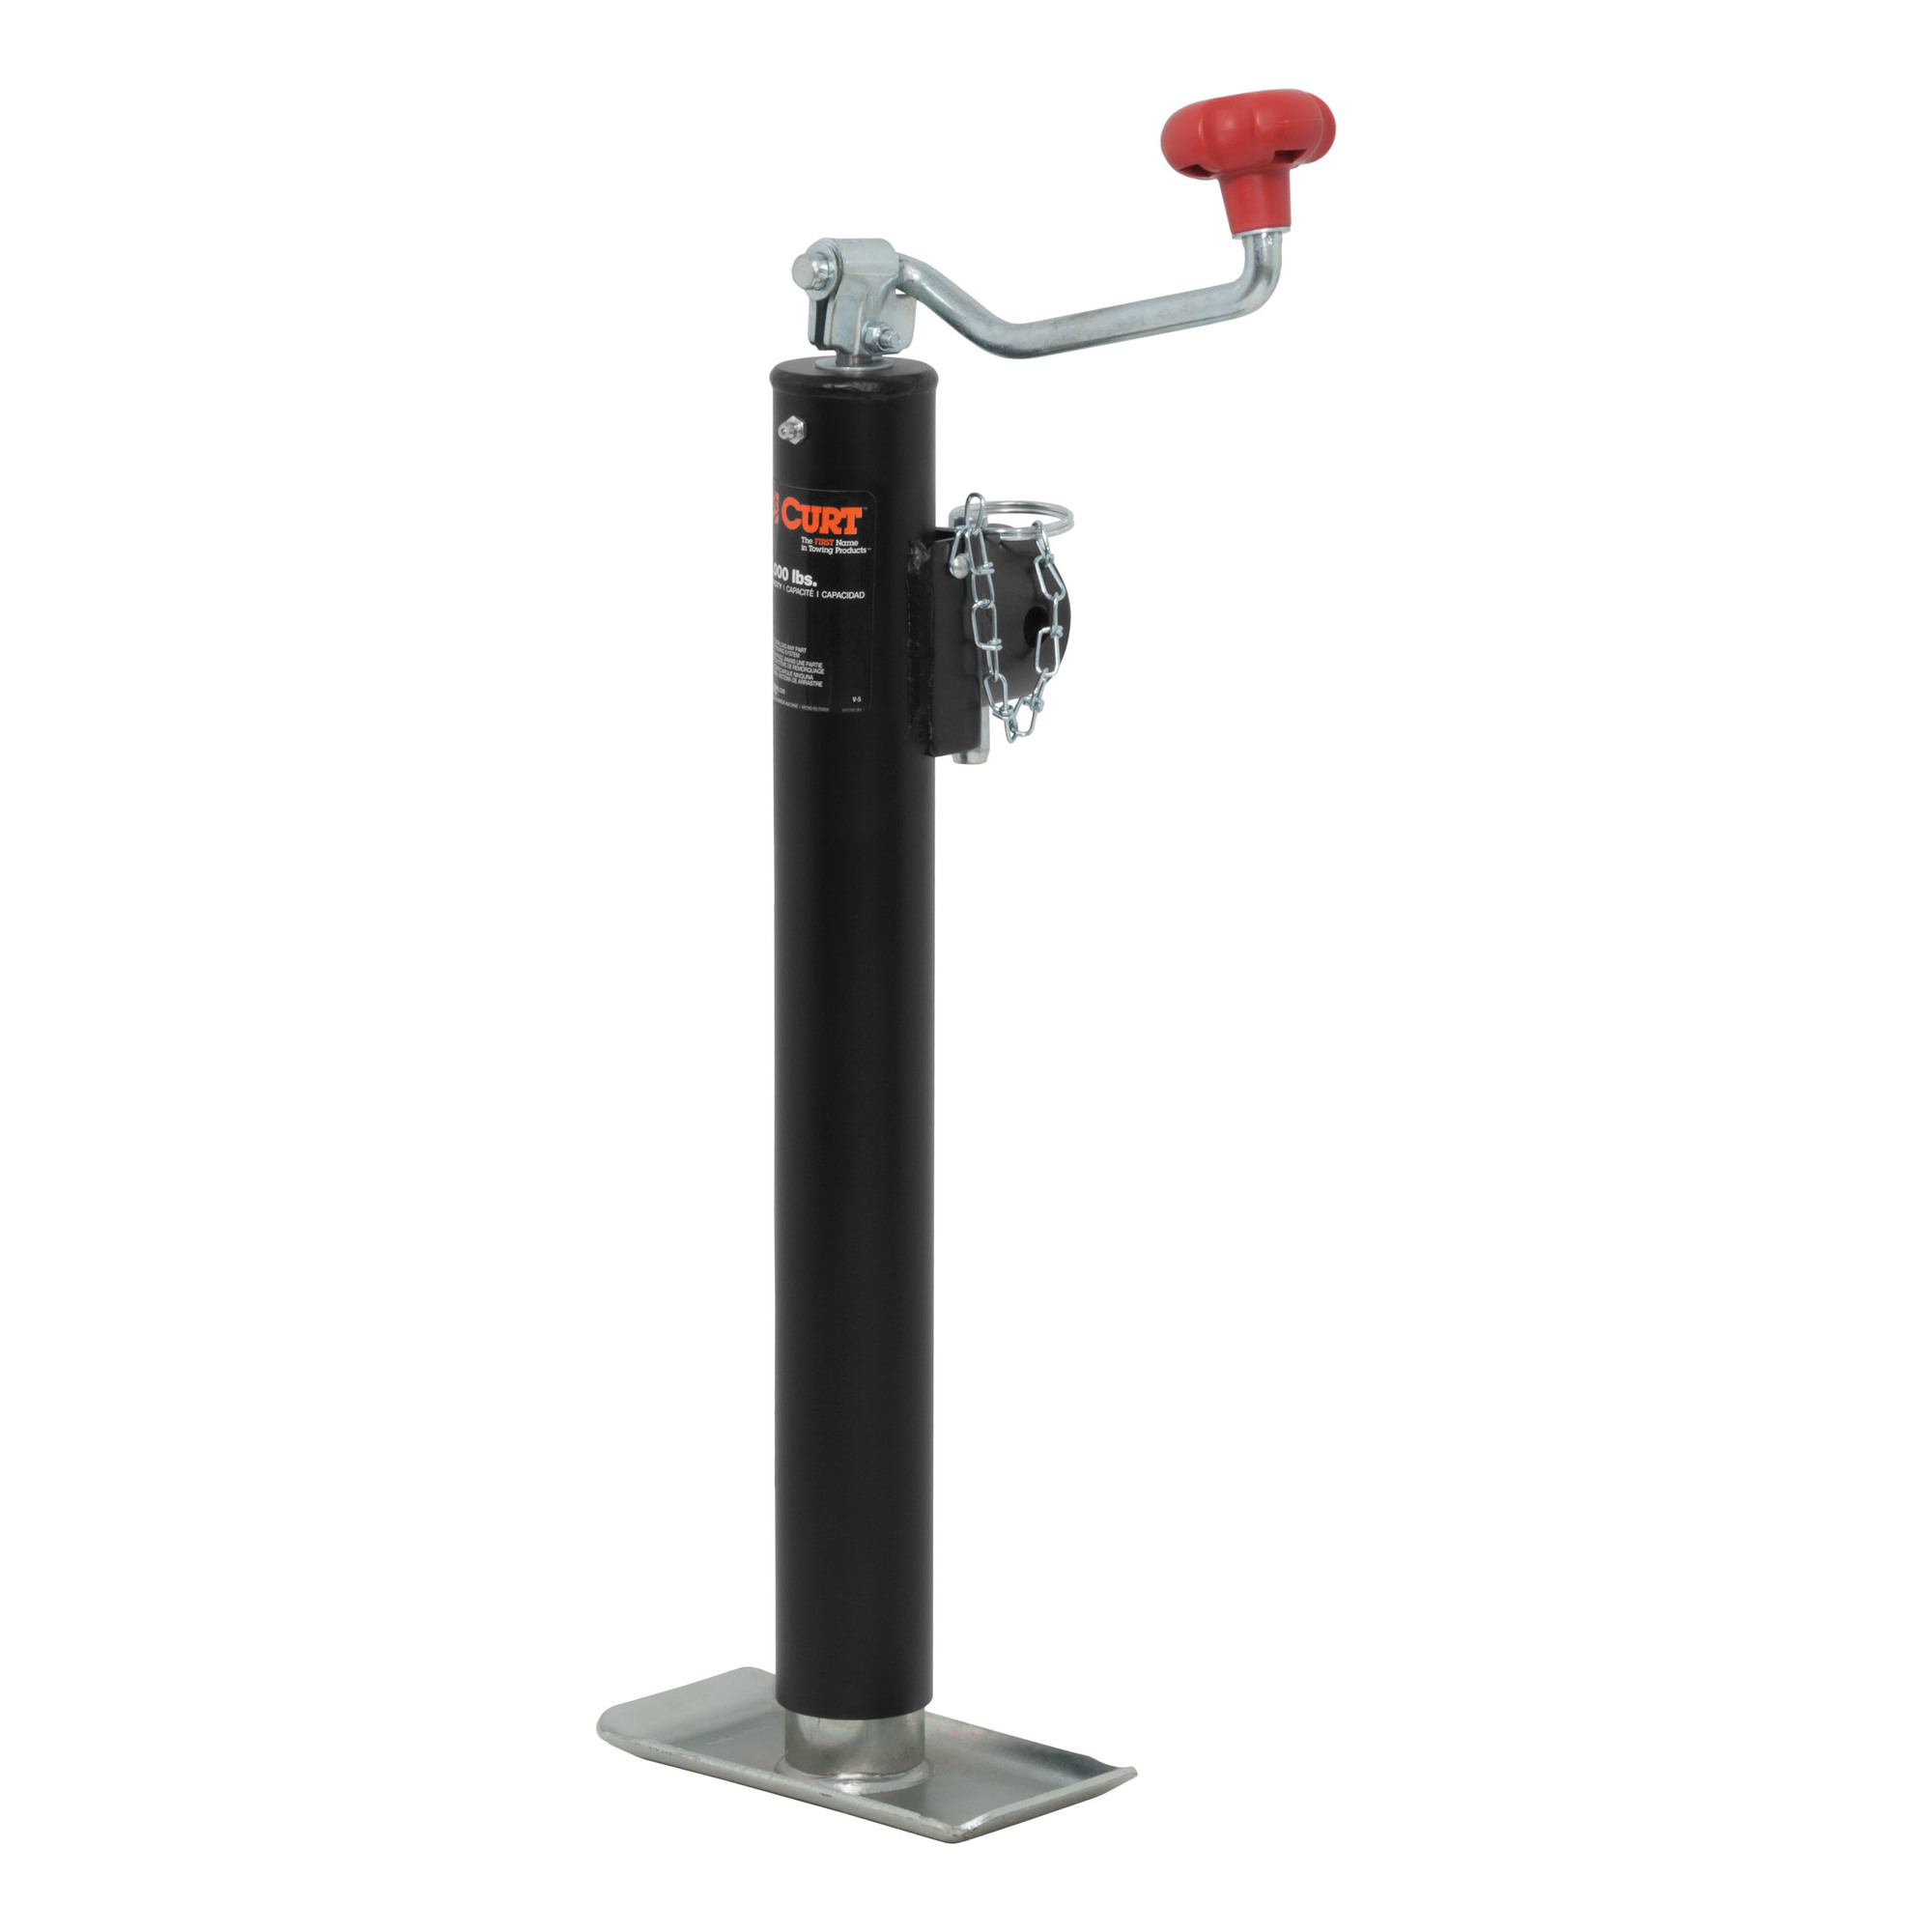 Curt Manufacturing, Pipe-Mnt Jack w Top Handle 2000 lbs 15Inch Travel, Lift Capacity 2000 lb, Jack Type Topwind, Mount Type Weld-On, Model 28323